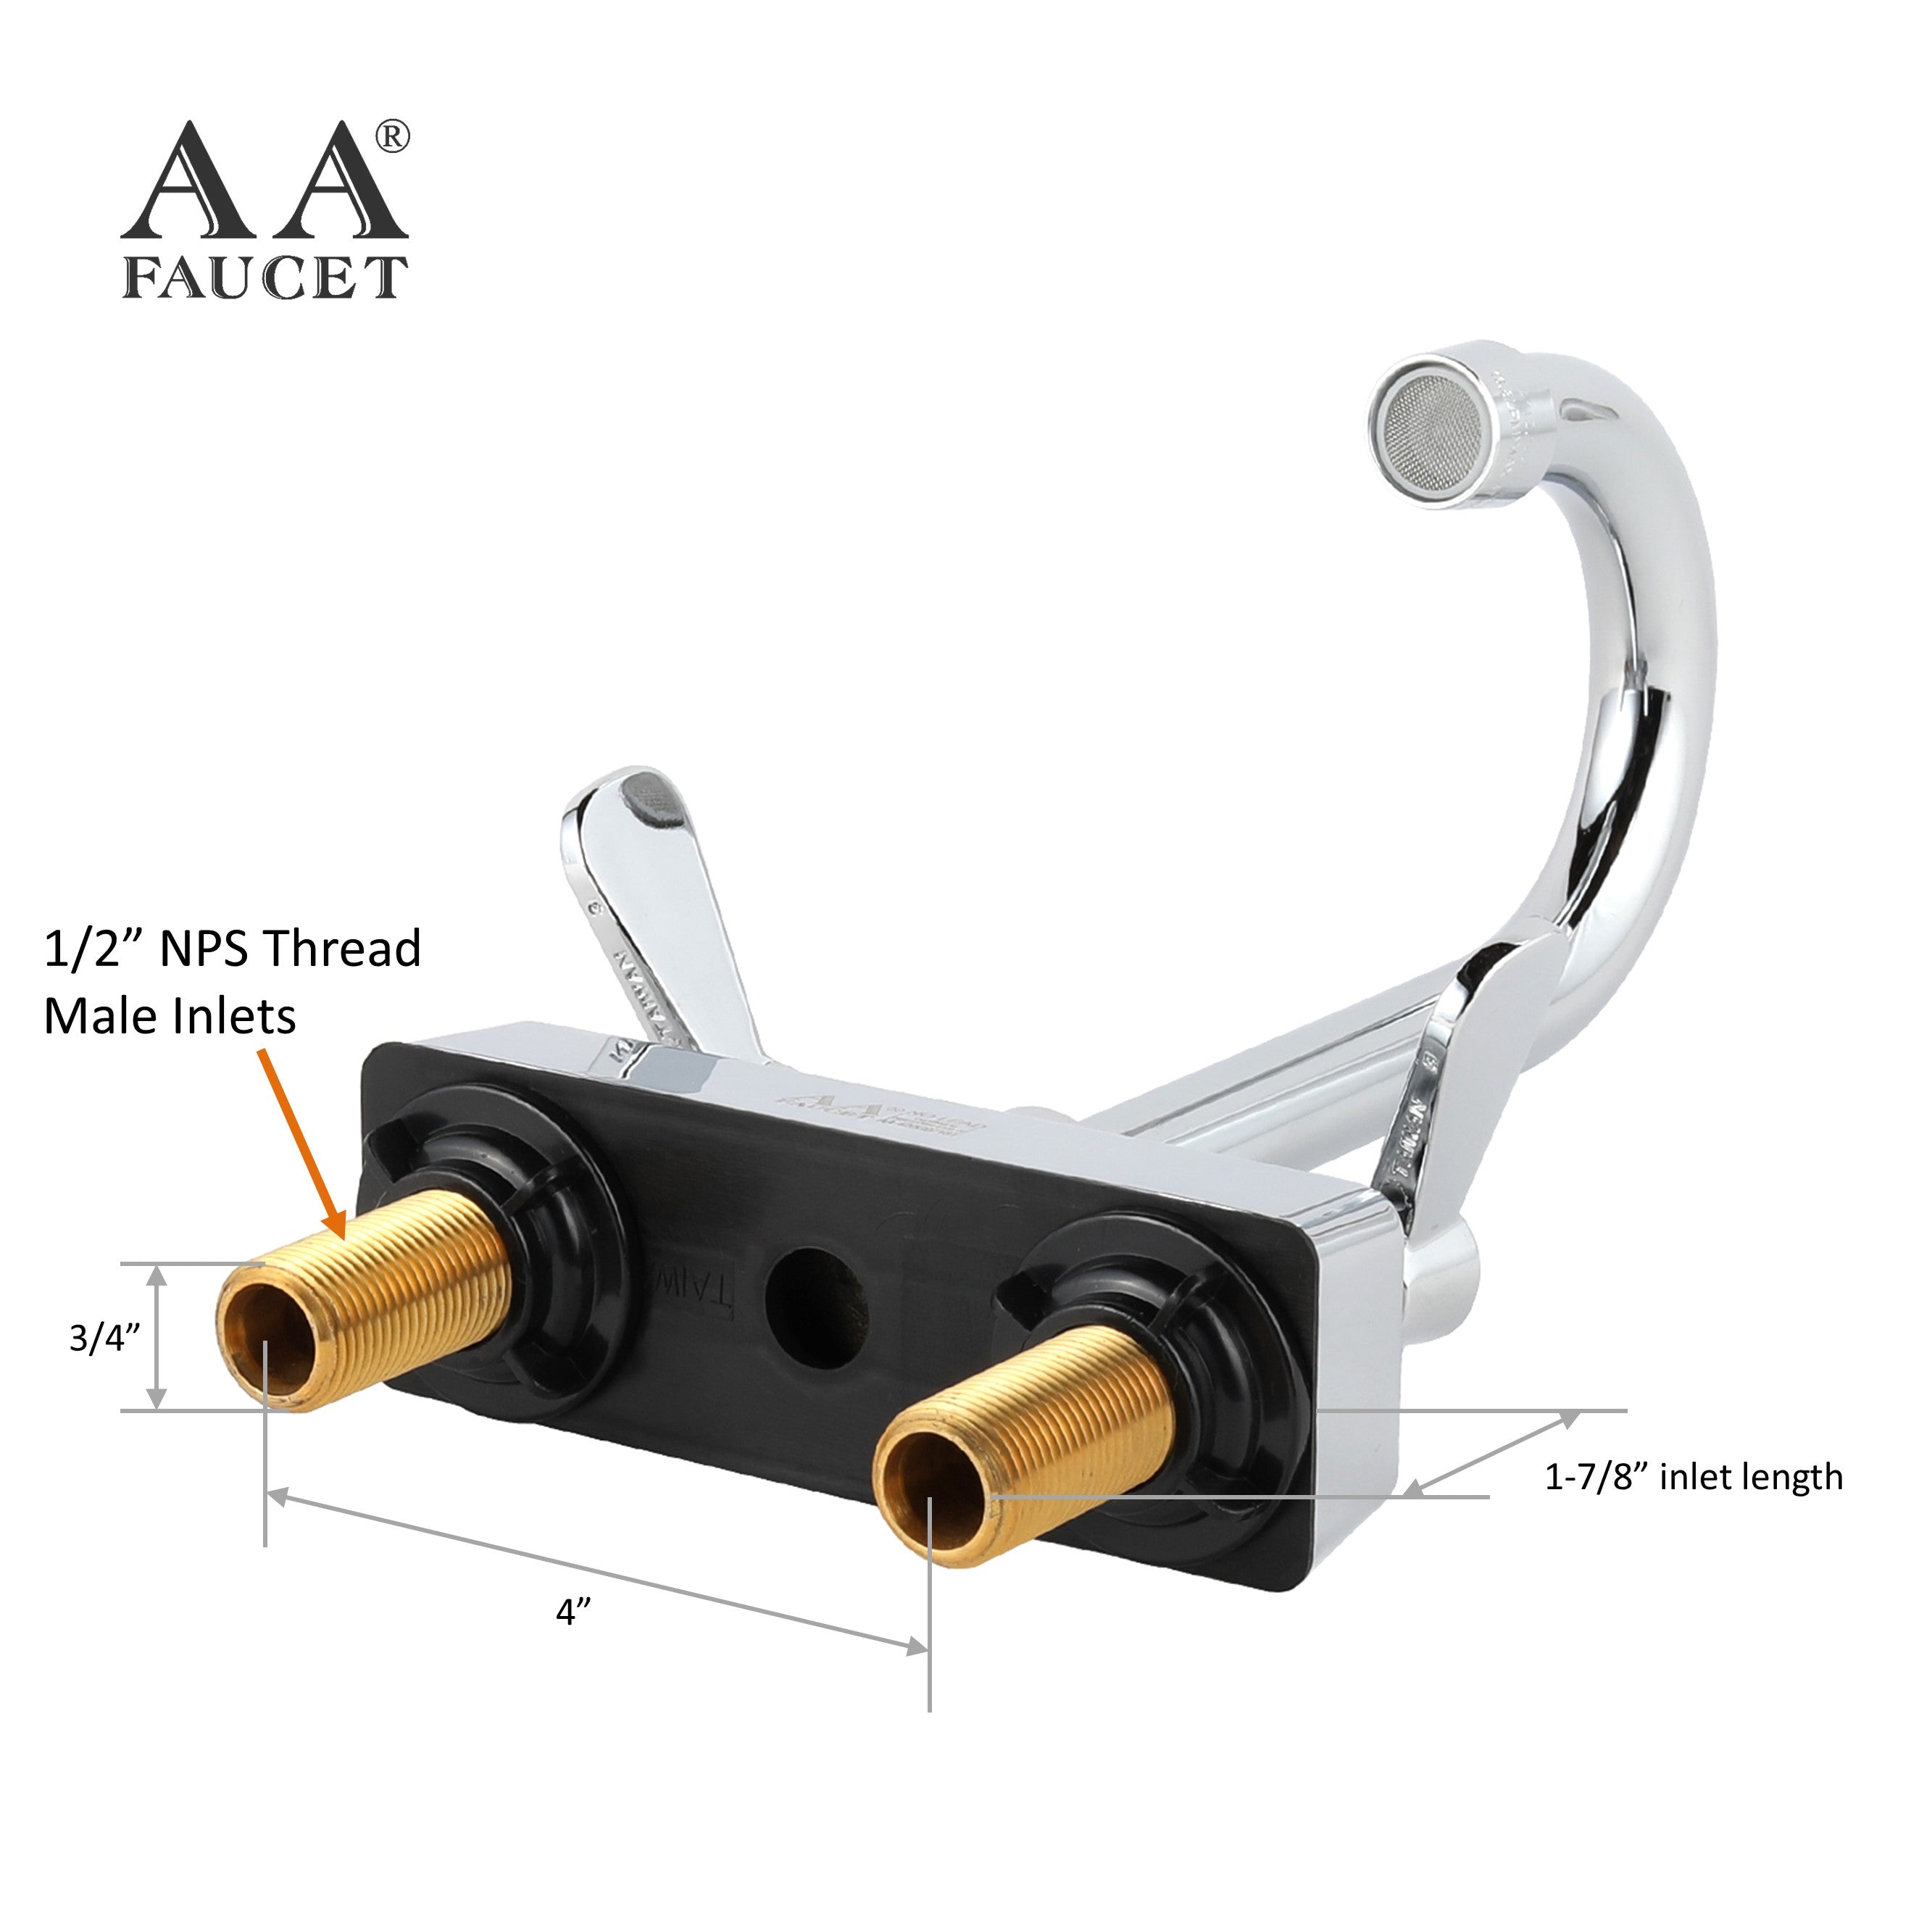 AA Faucet 4" Deck Mount Commercial Bar Sink Faucet with 3-1/2" Gooseneck Spout, Brass Construction Chrome Polished for Restaurant Kitchen NSF Approved